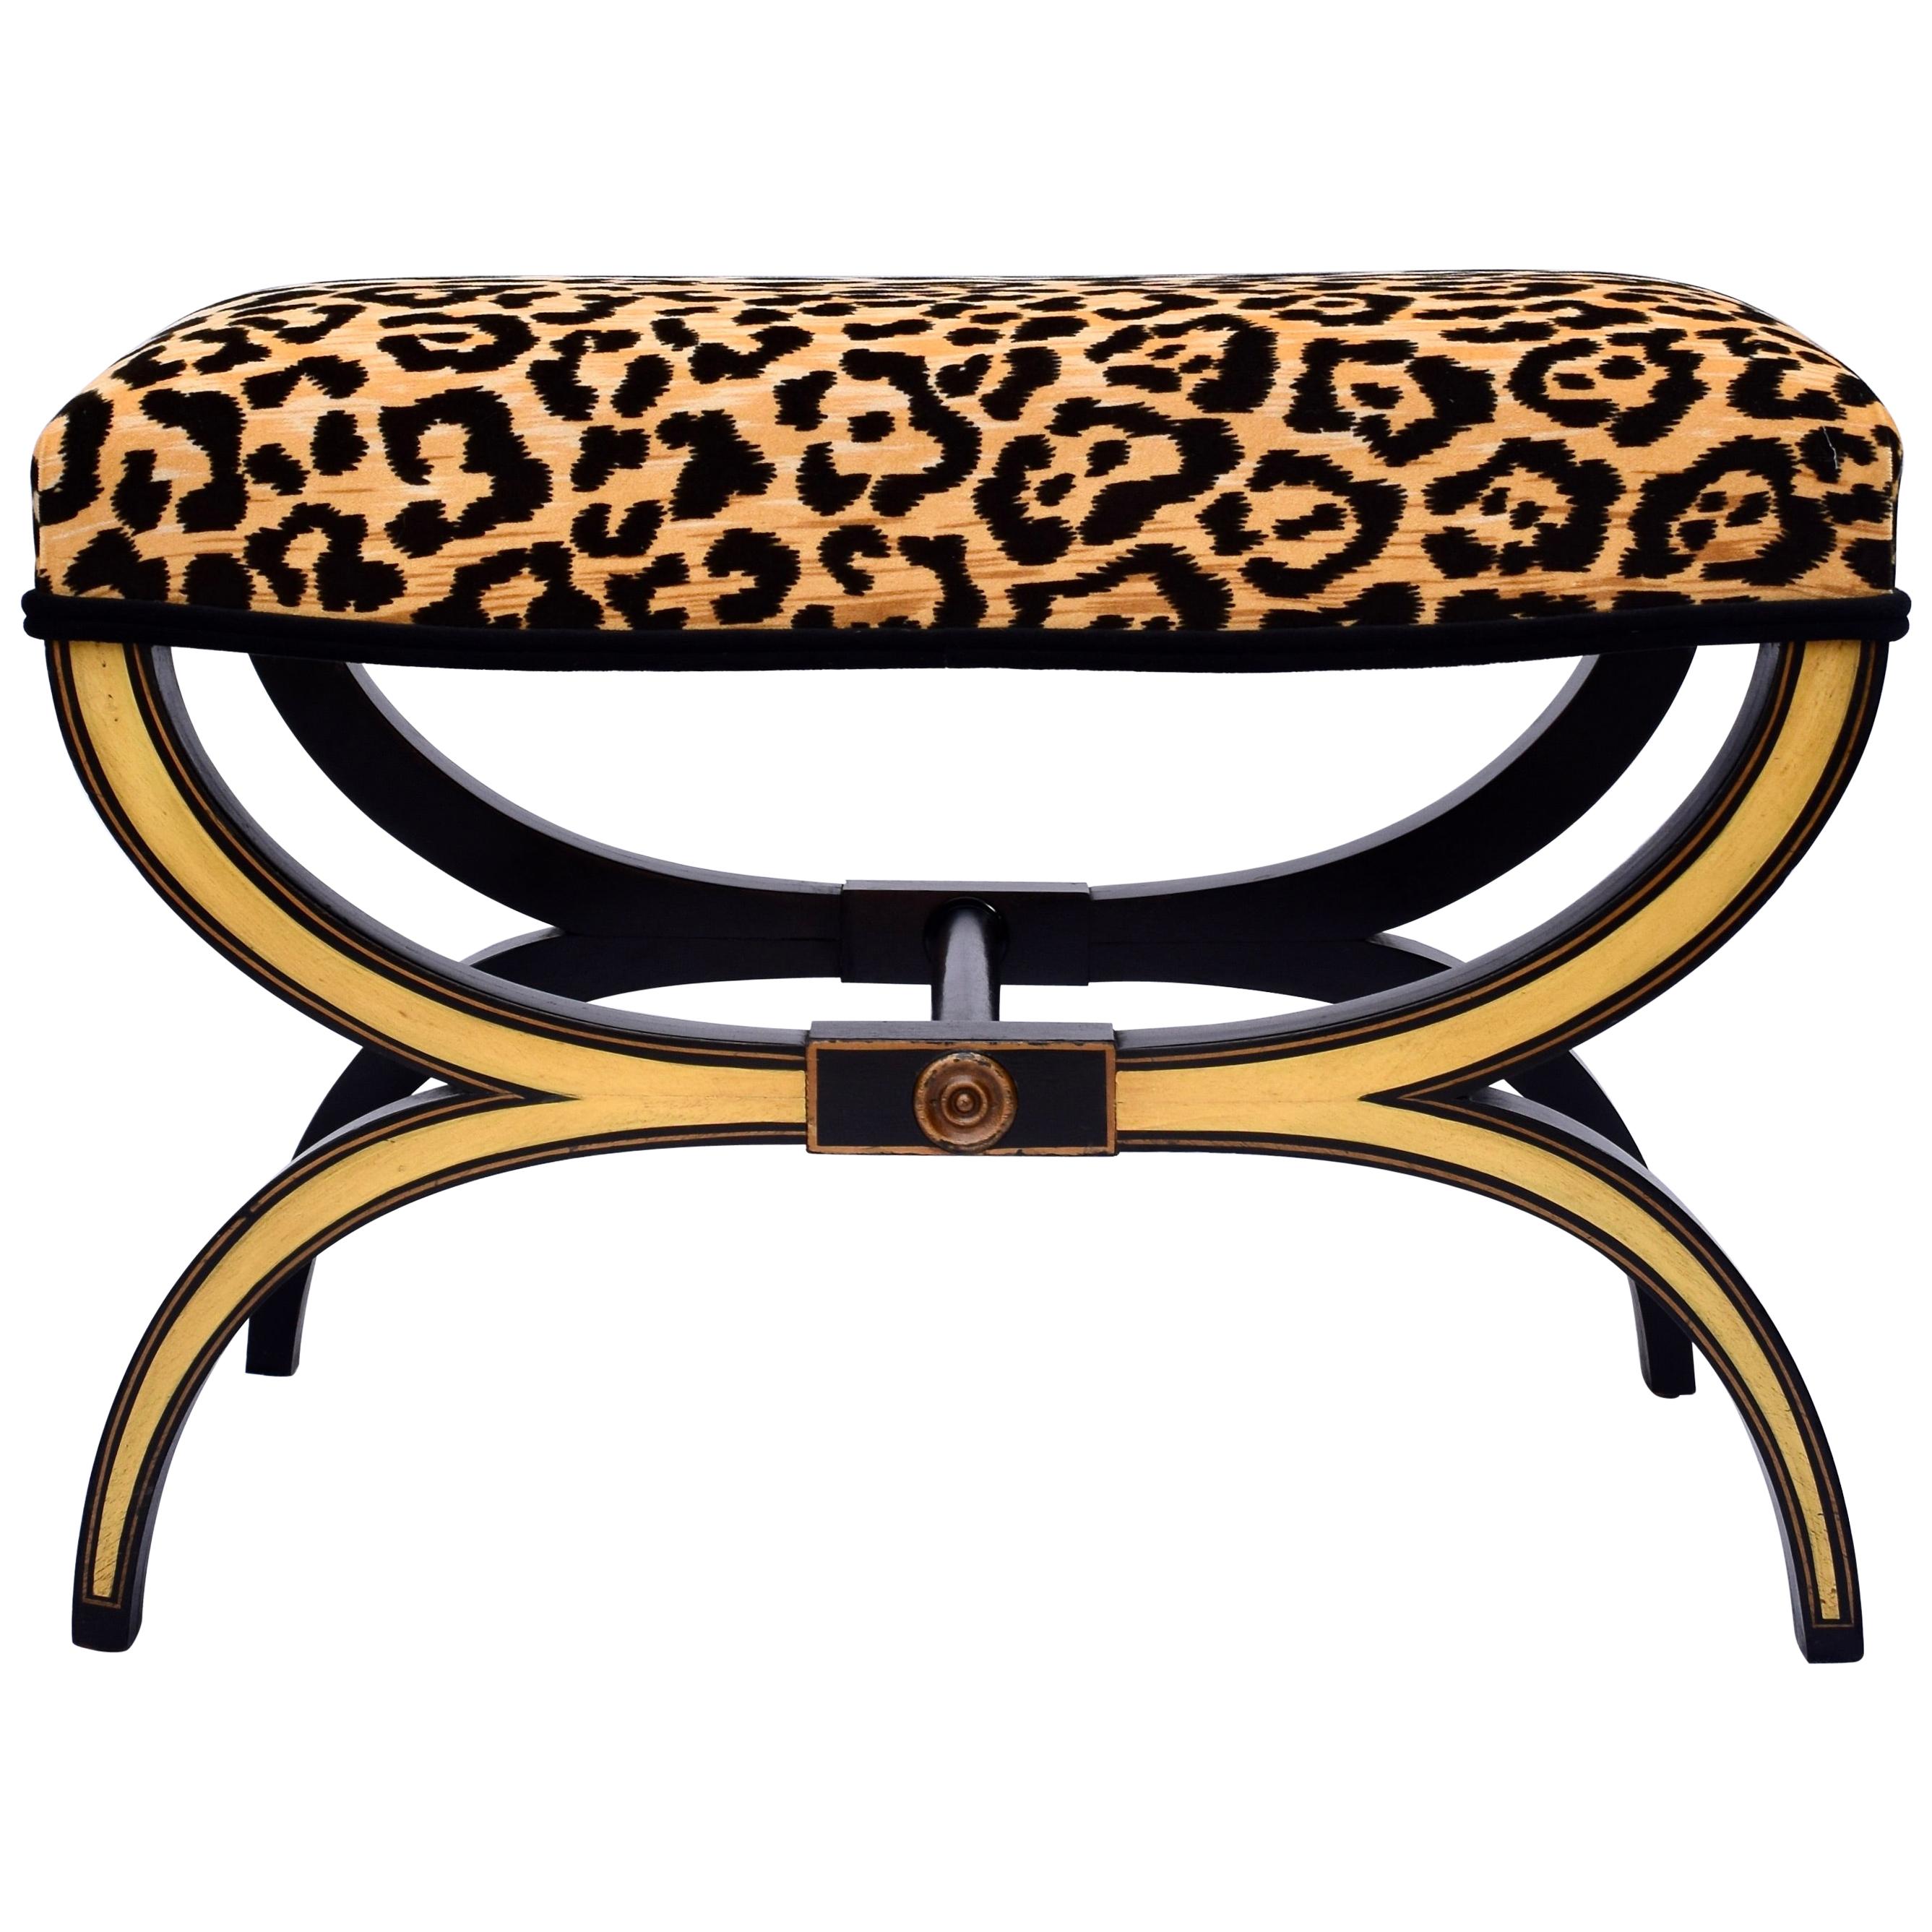 Neoclassical Style Curule Bench or Stool in Velvet Leopard